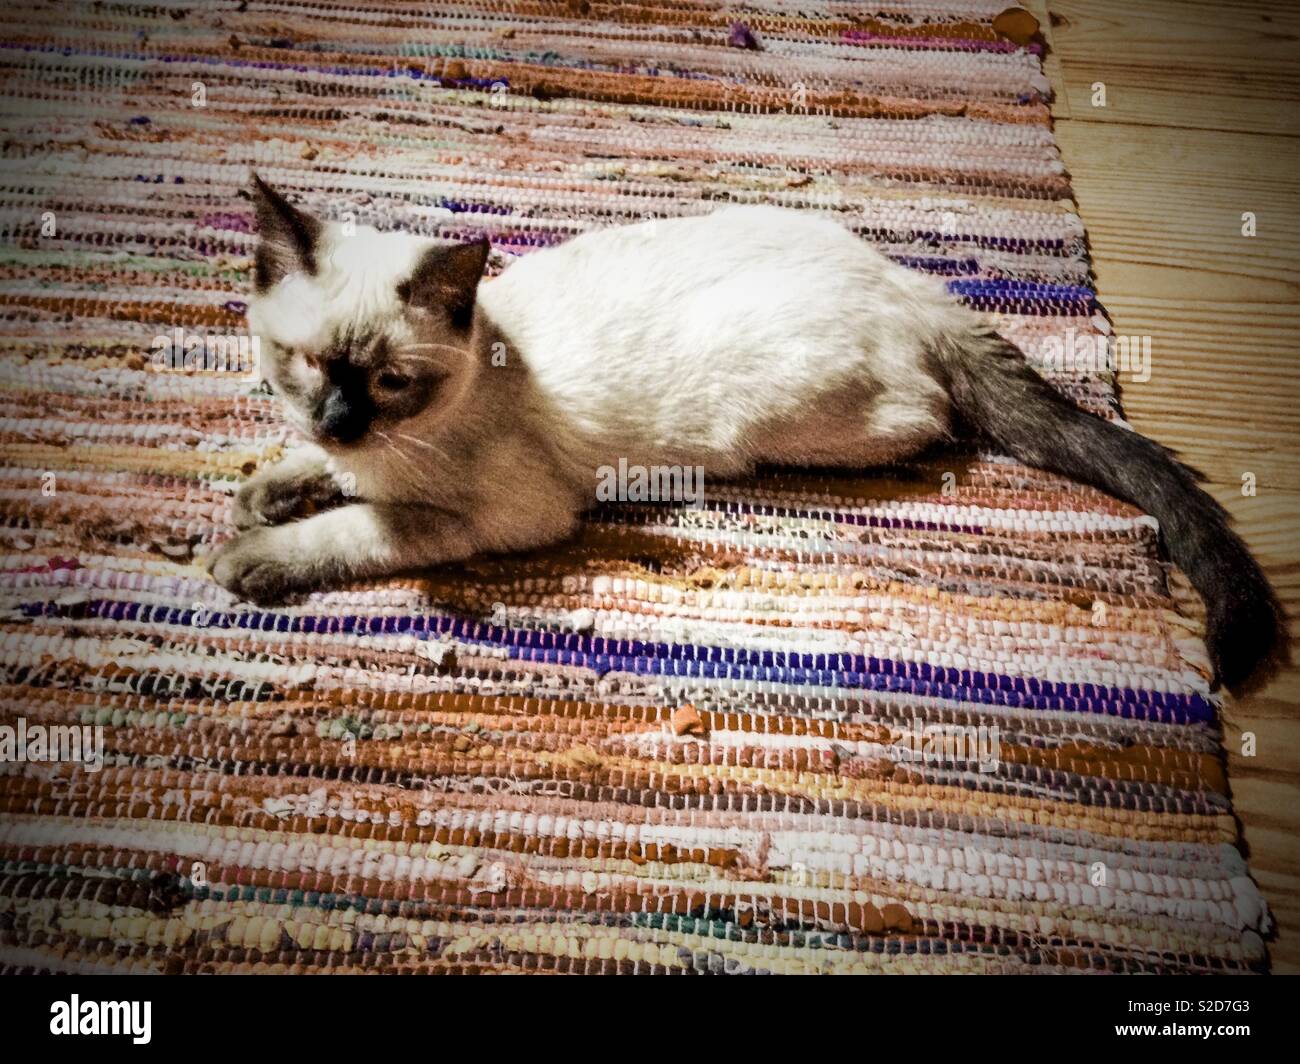 Well-loved one-eyed Siamese kitten on a braided rug Stock Photo